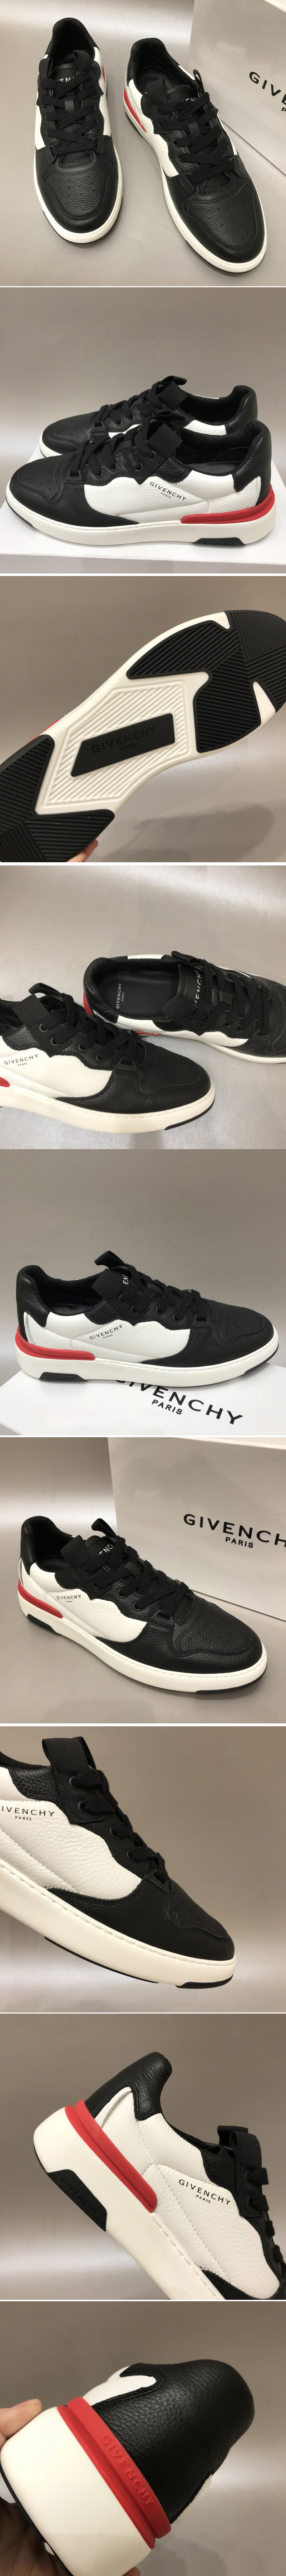 Replica Givenchy Shoes